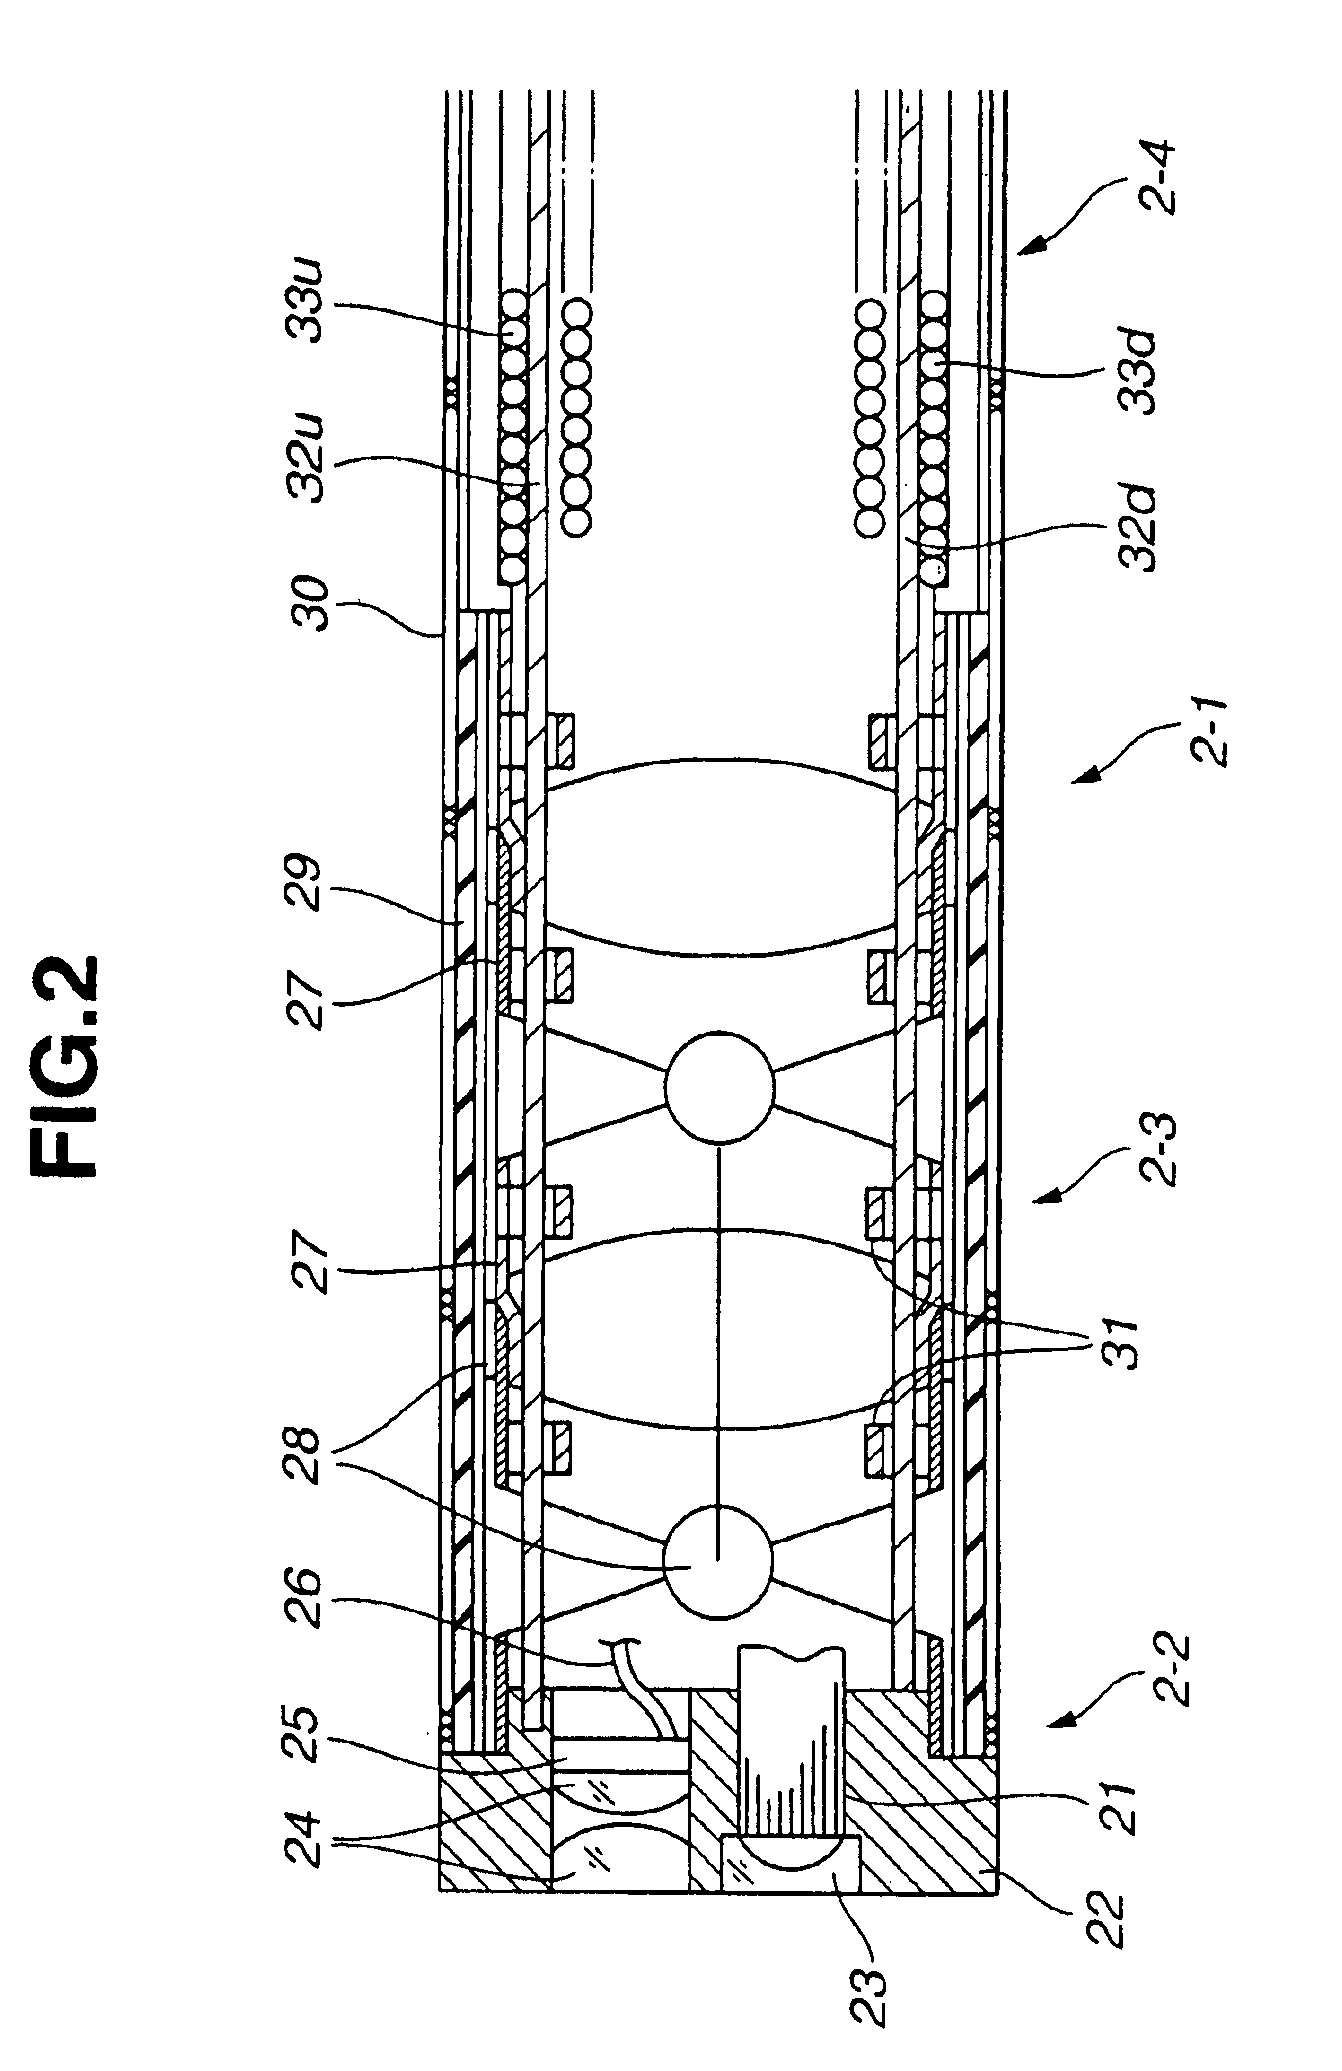 Endoscope apparatus with drum part to wind insertion part therearound